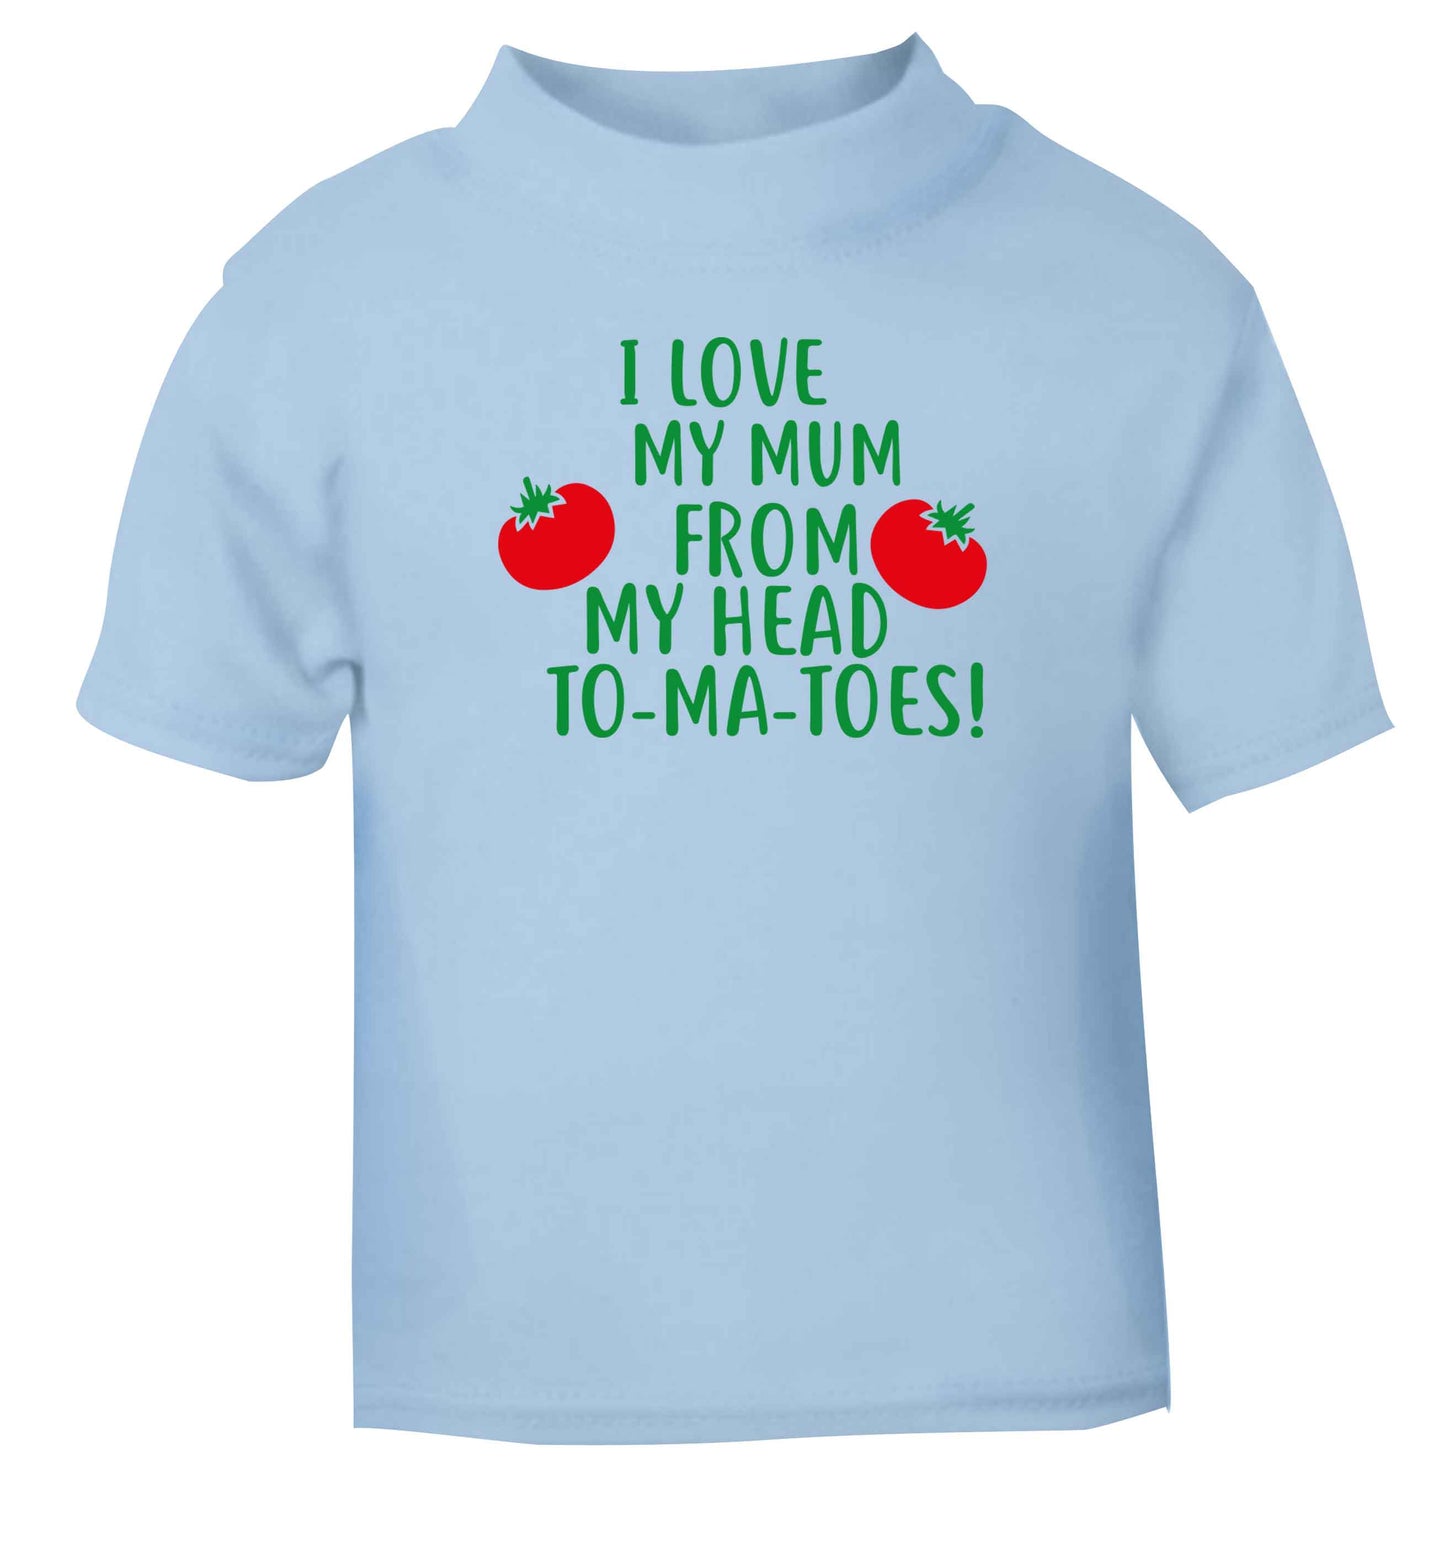 I love my mum from my head to-my-toes! light blue baby toddler Tshirt 2 Years